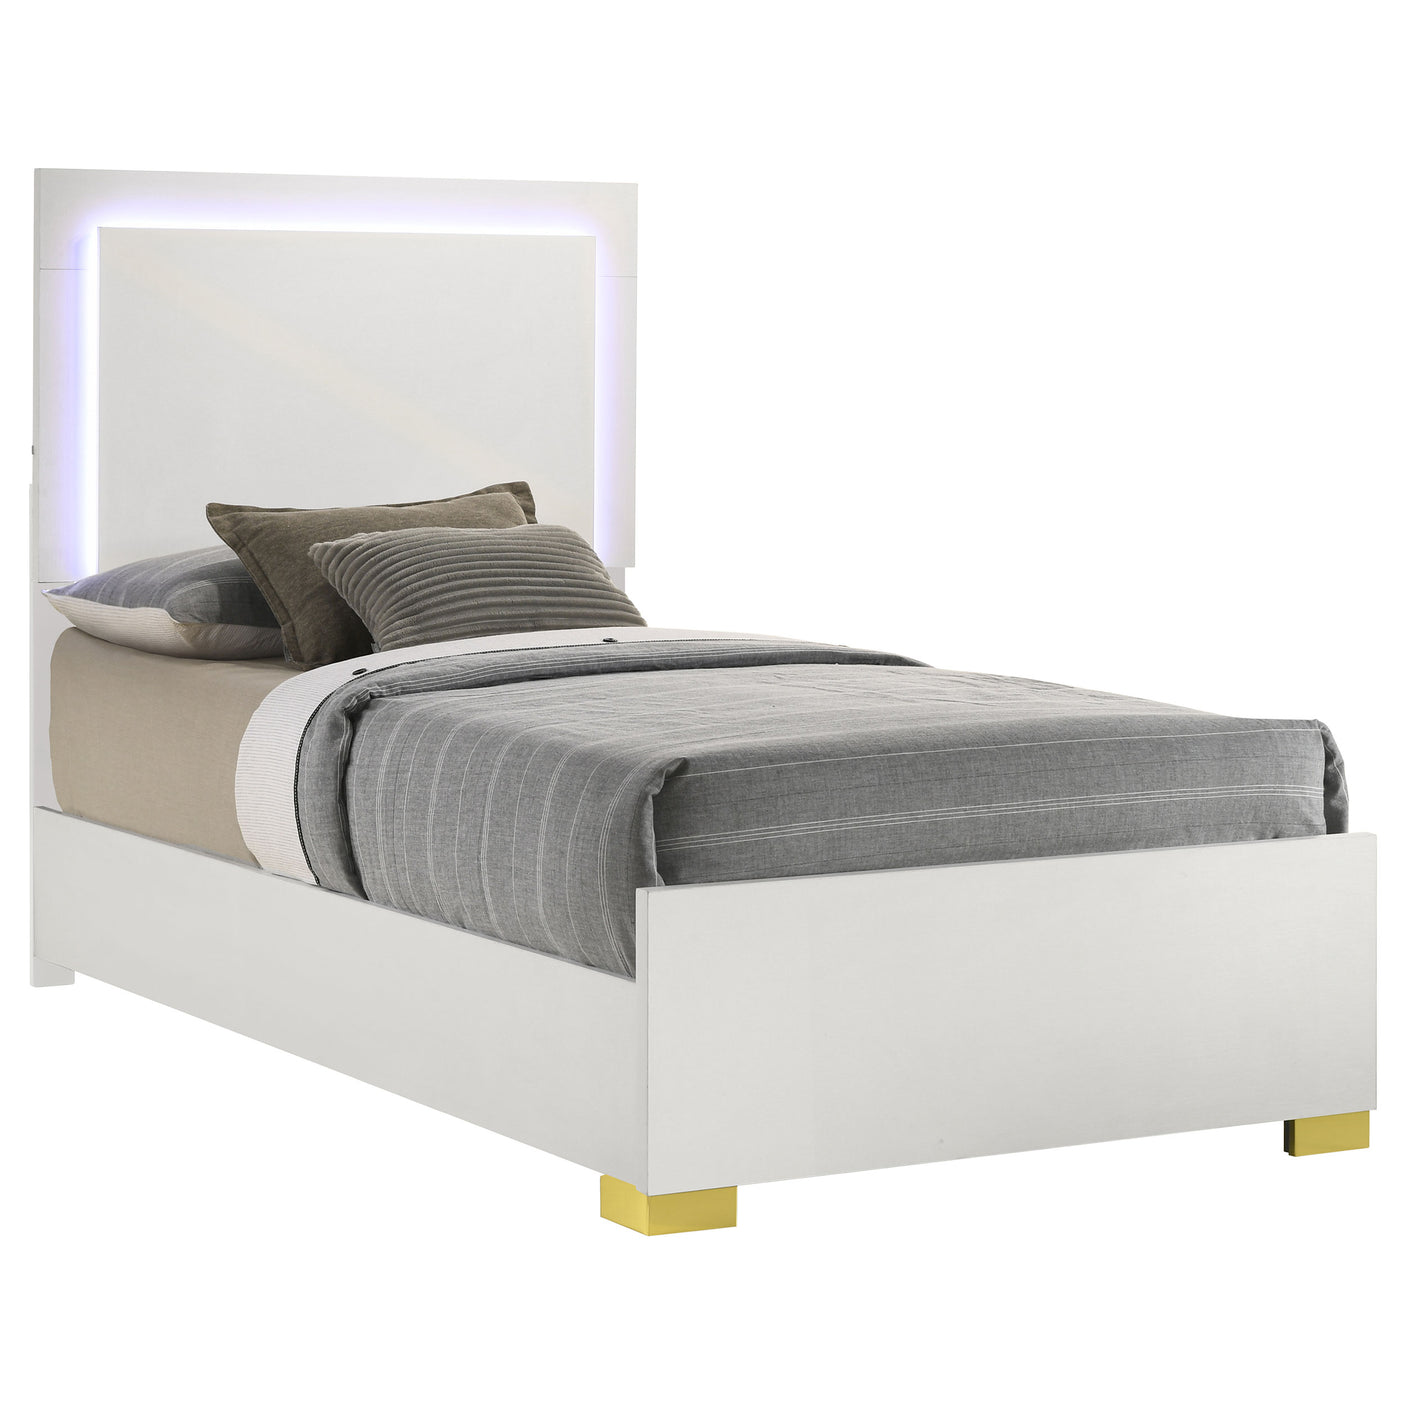 Twin Bed - Marceline Wood Twin LED Panel Bed White